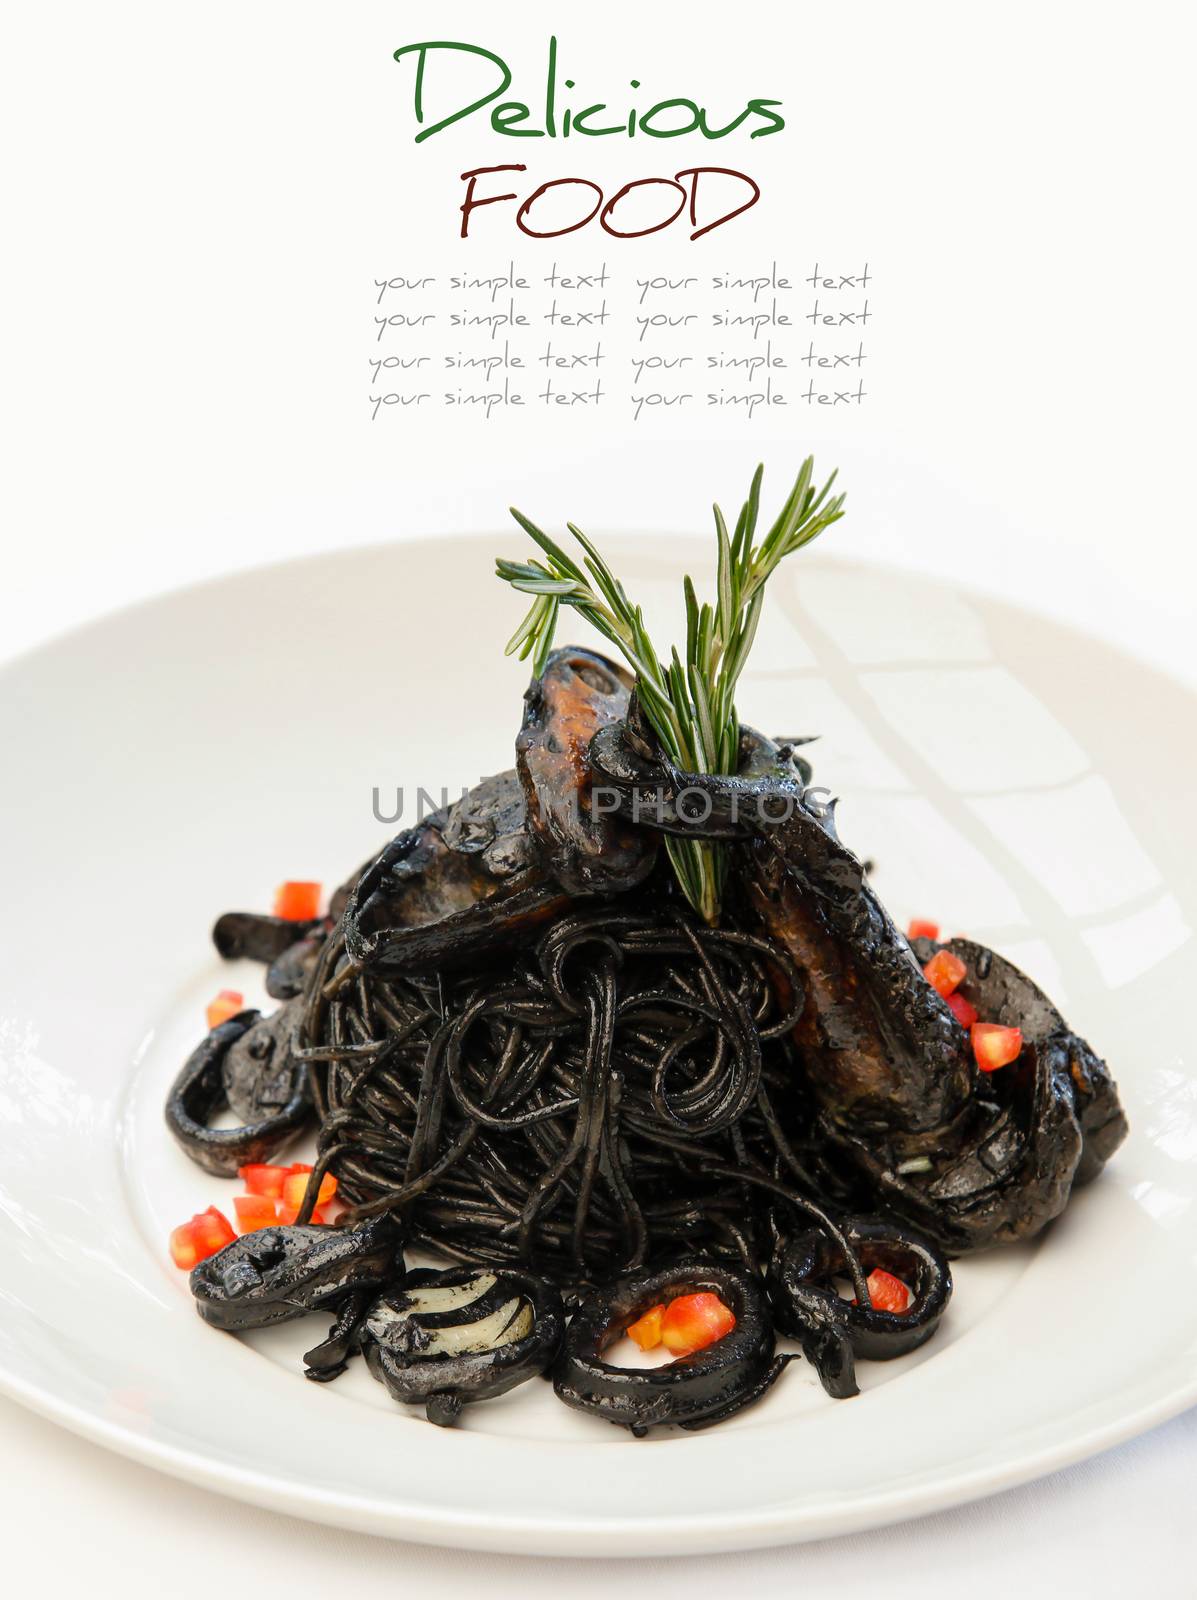 Italian cuisine squid ink spaghetti and seafood. by kerdkanno